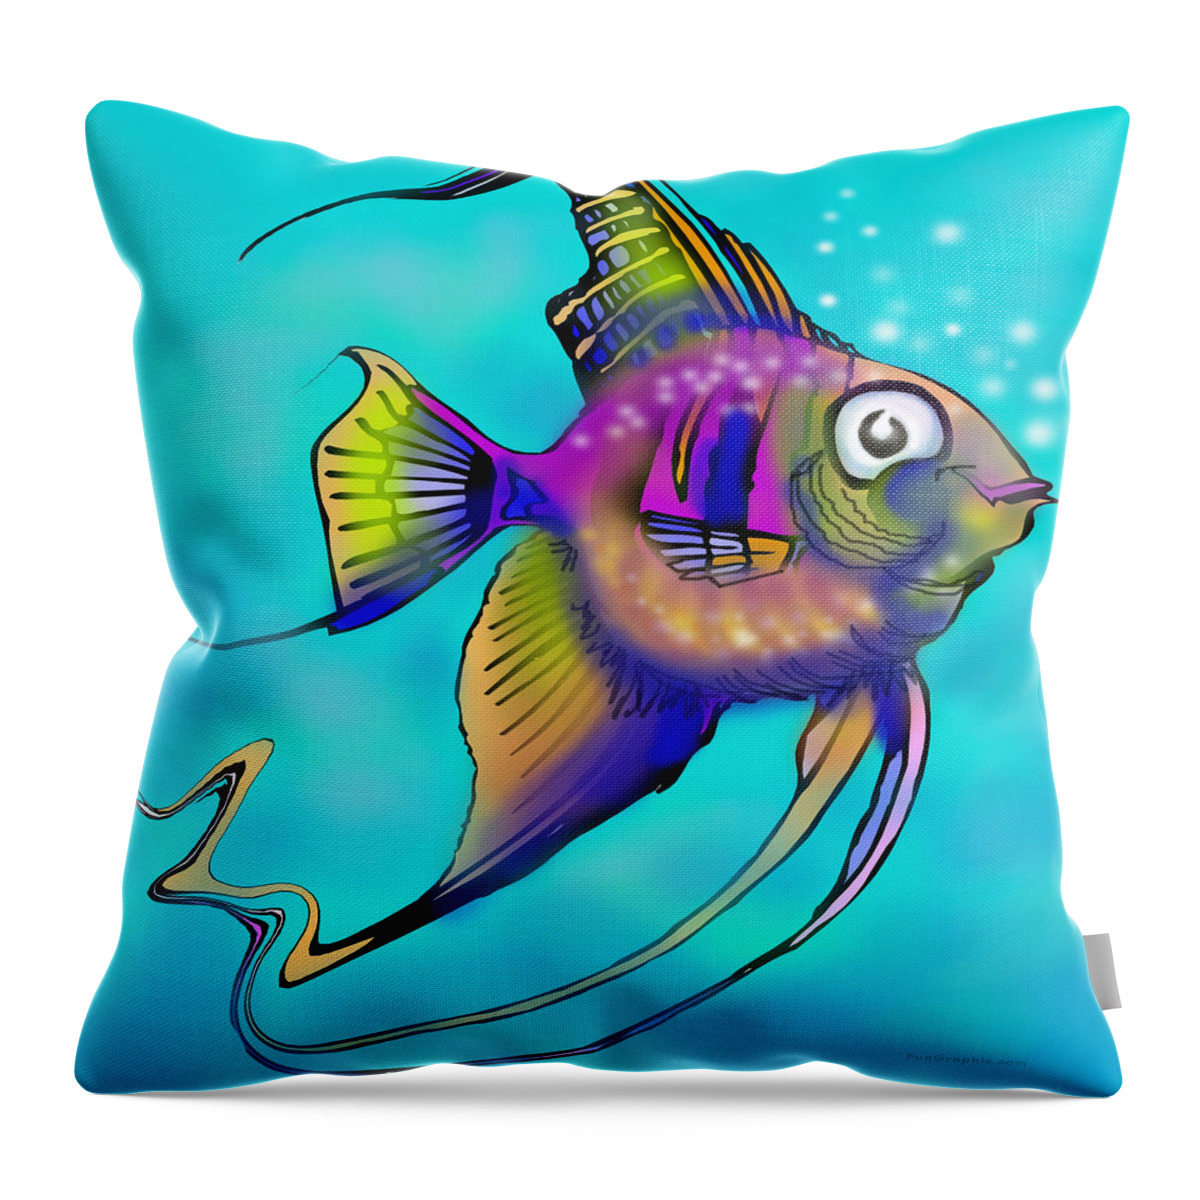 Angelfish Throw Pillow featuring the painting Angelfish by Kevin Middleton